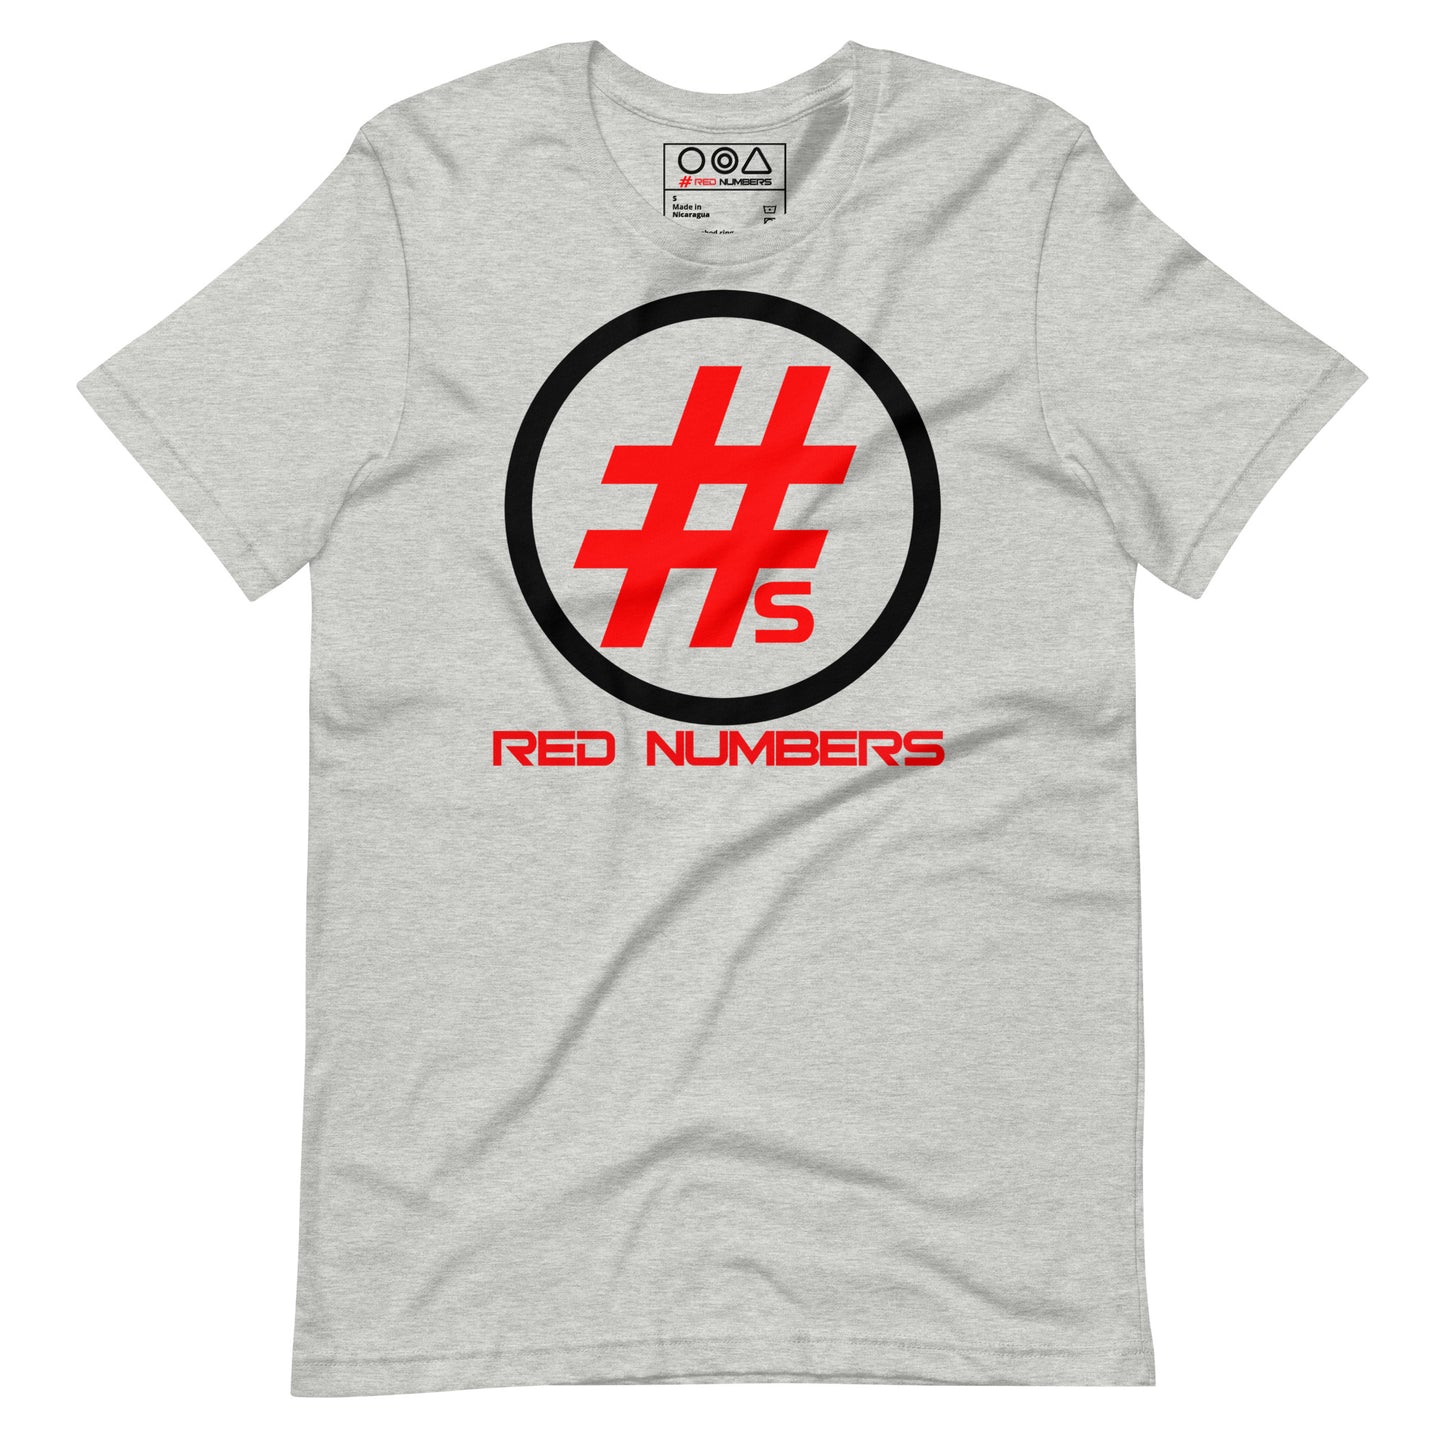 Red Numbers - Circle It Big Front t-shirt